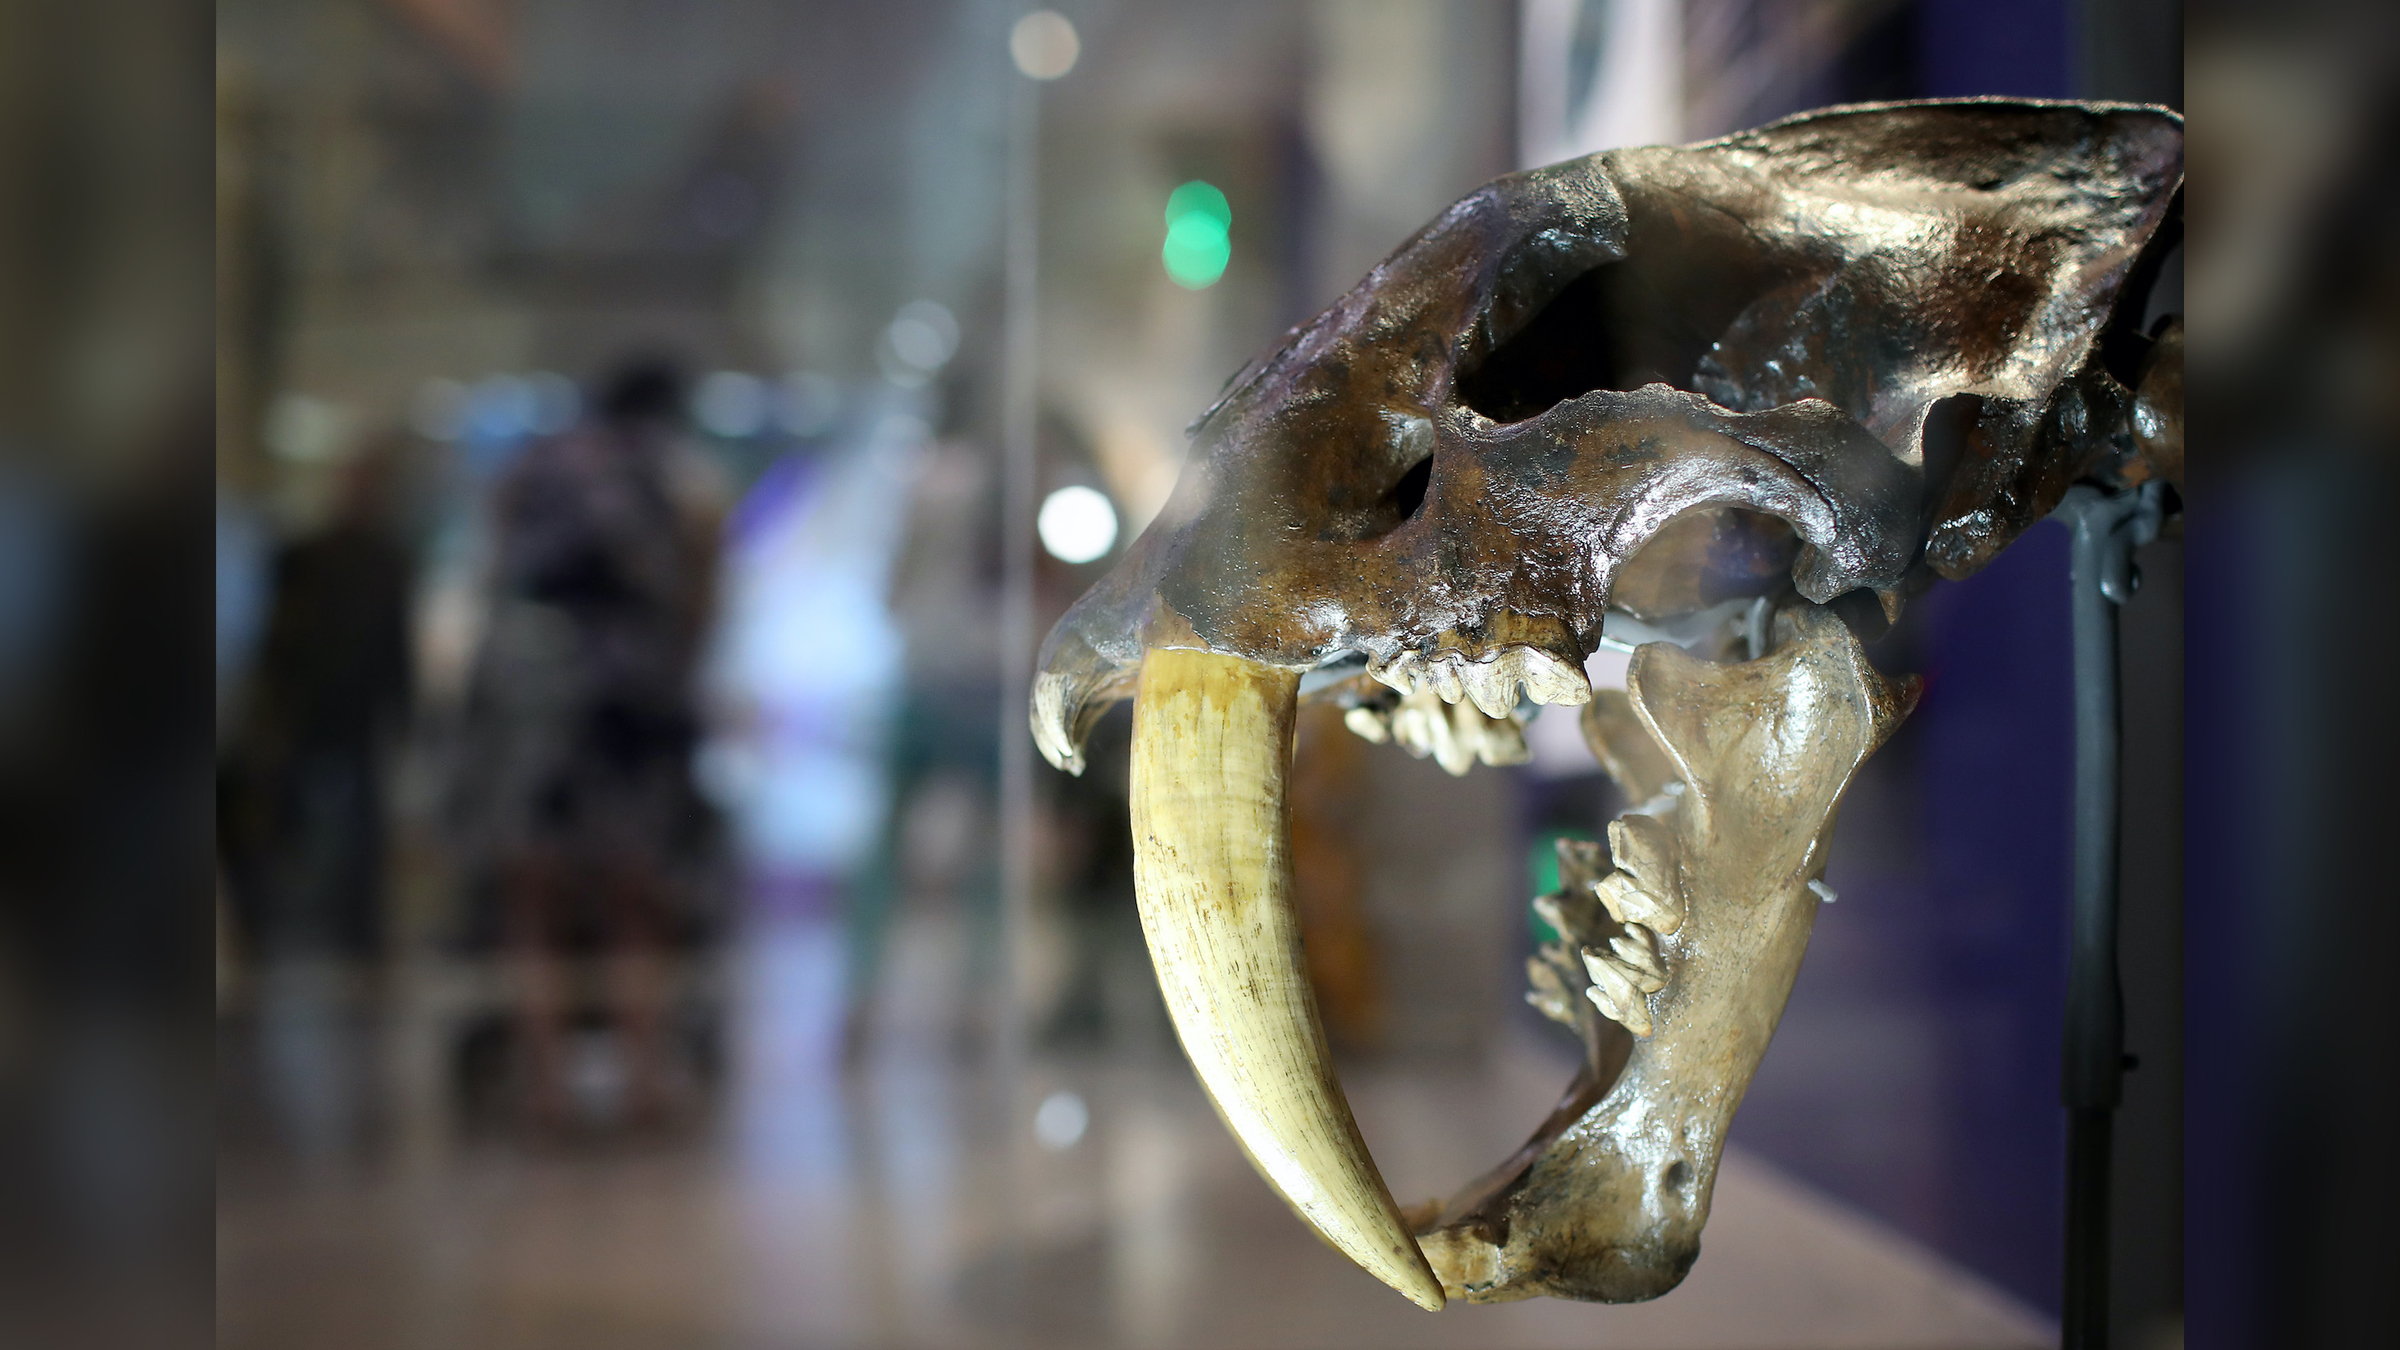 A skull of the famous saber-toothed cat (Smilodon fatalis) on display at the Smithsonian's National Museum of Natural History in Washington, D.C.